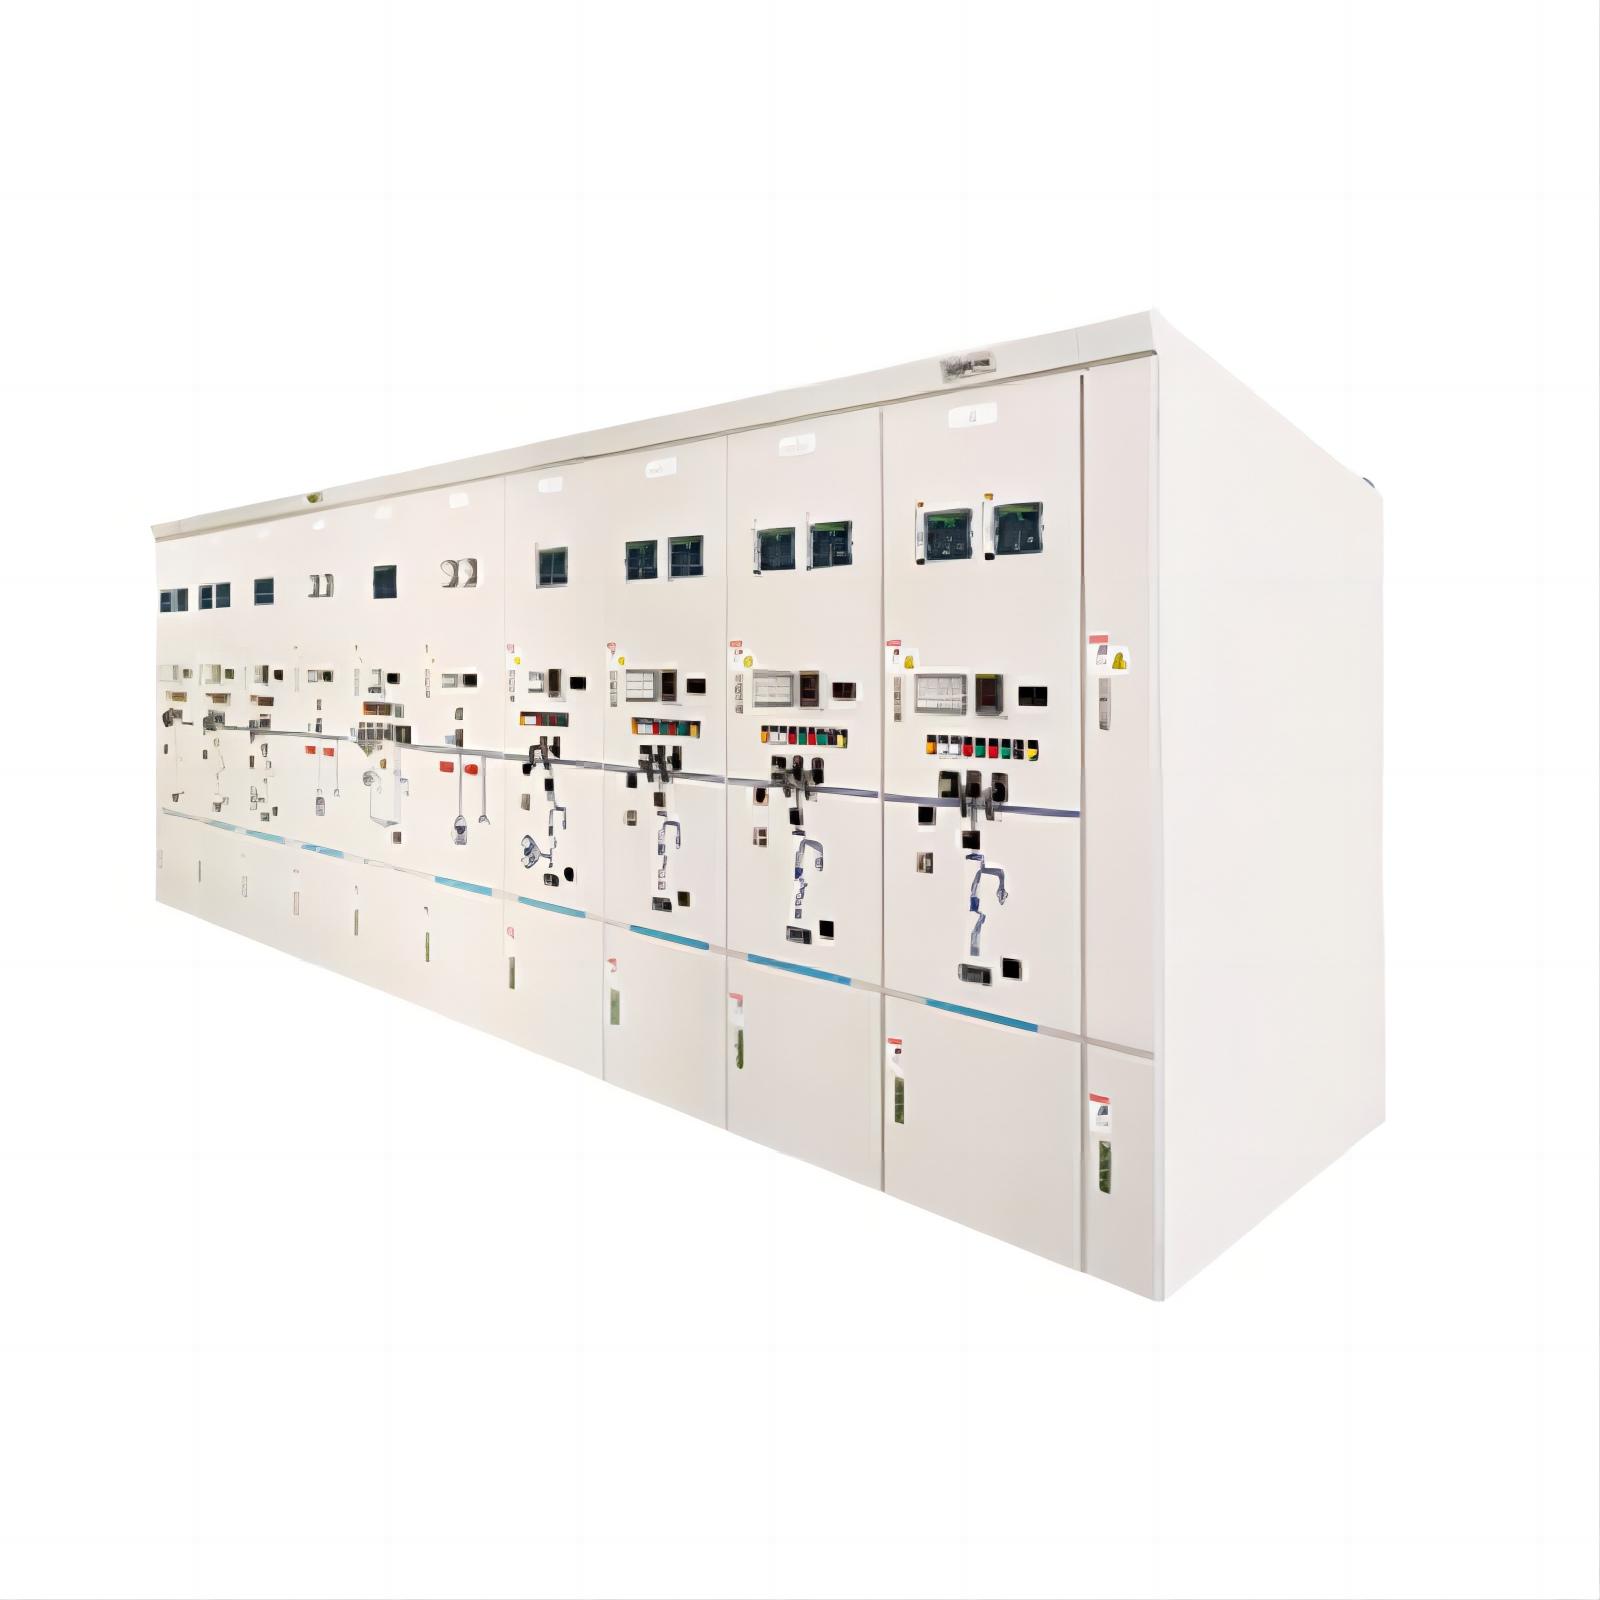 GIS Gas Sf6 Insulated Metal Enclosed Switchgear(C-GIS)_yyt